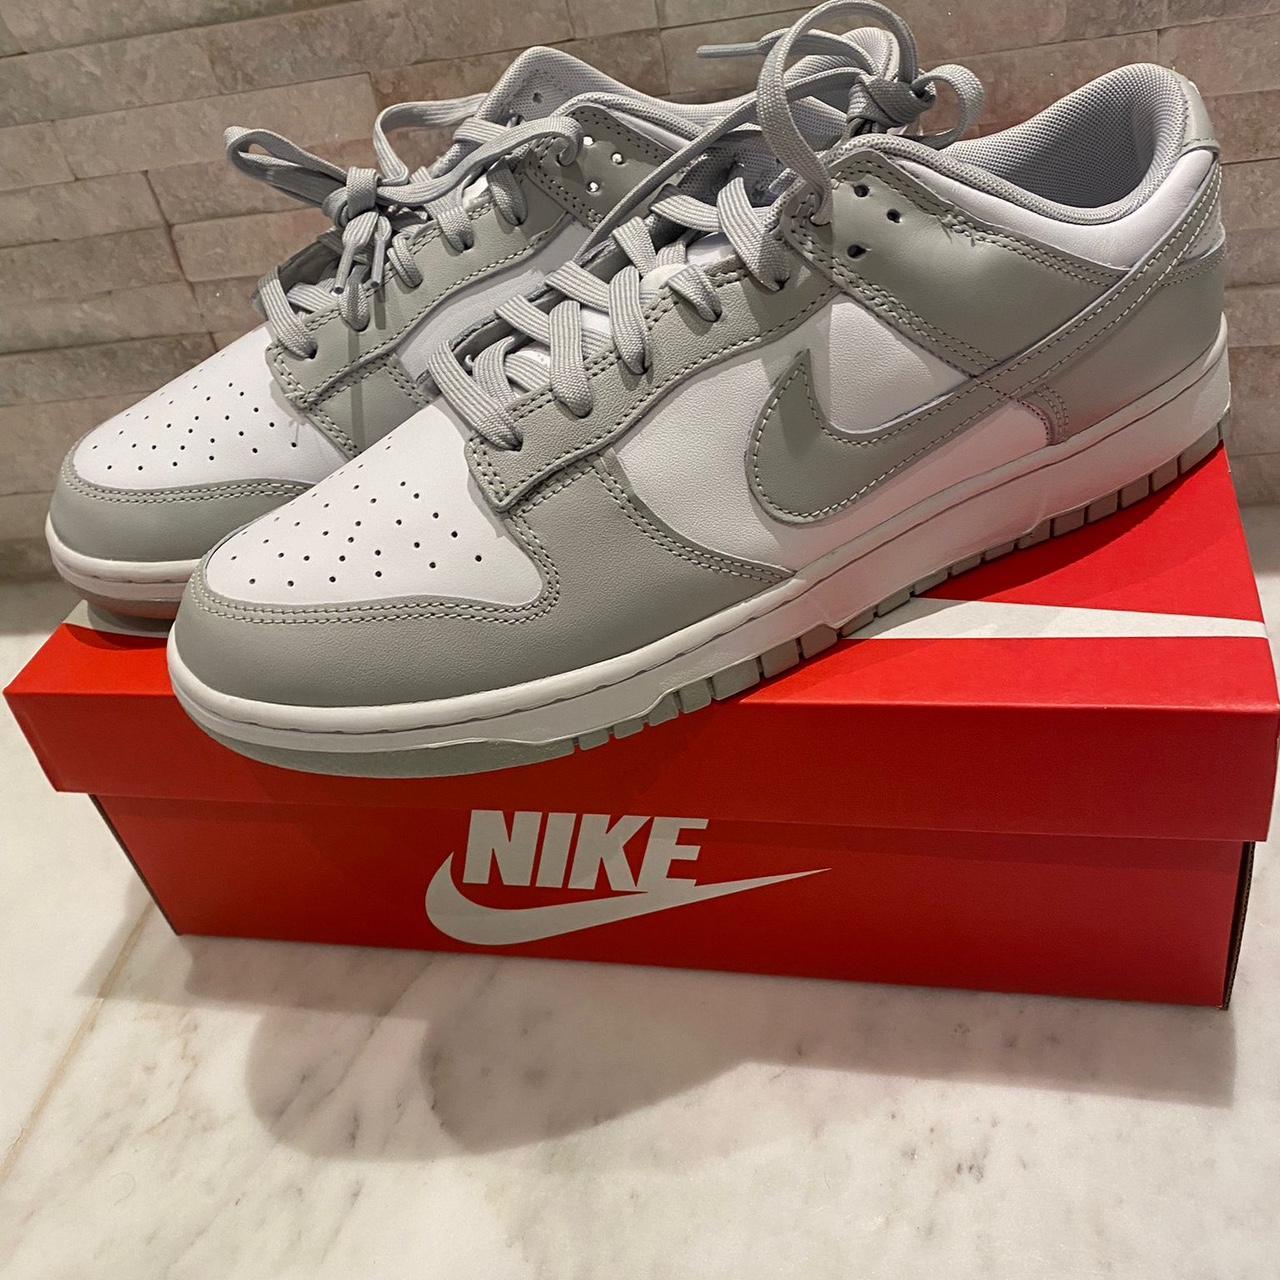 Nike Men's Grey and White Trainers | Depop